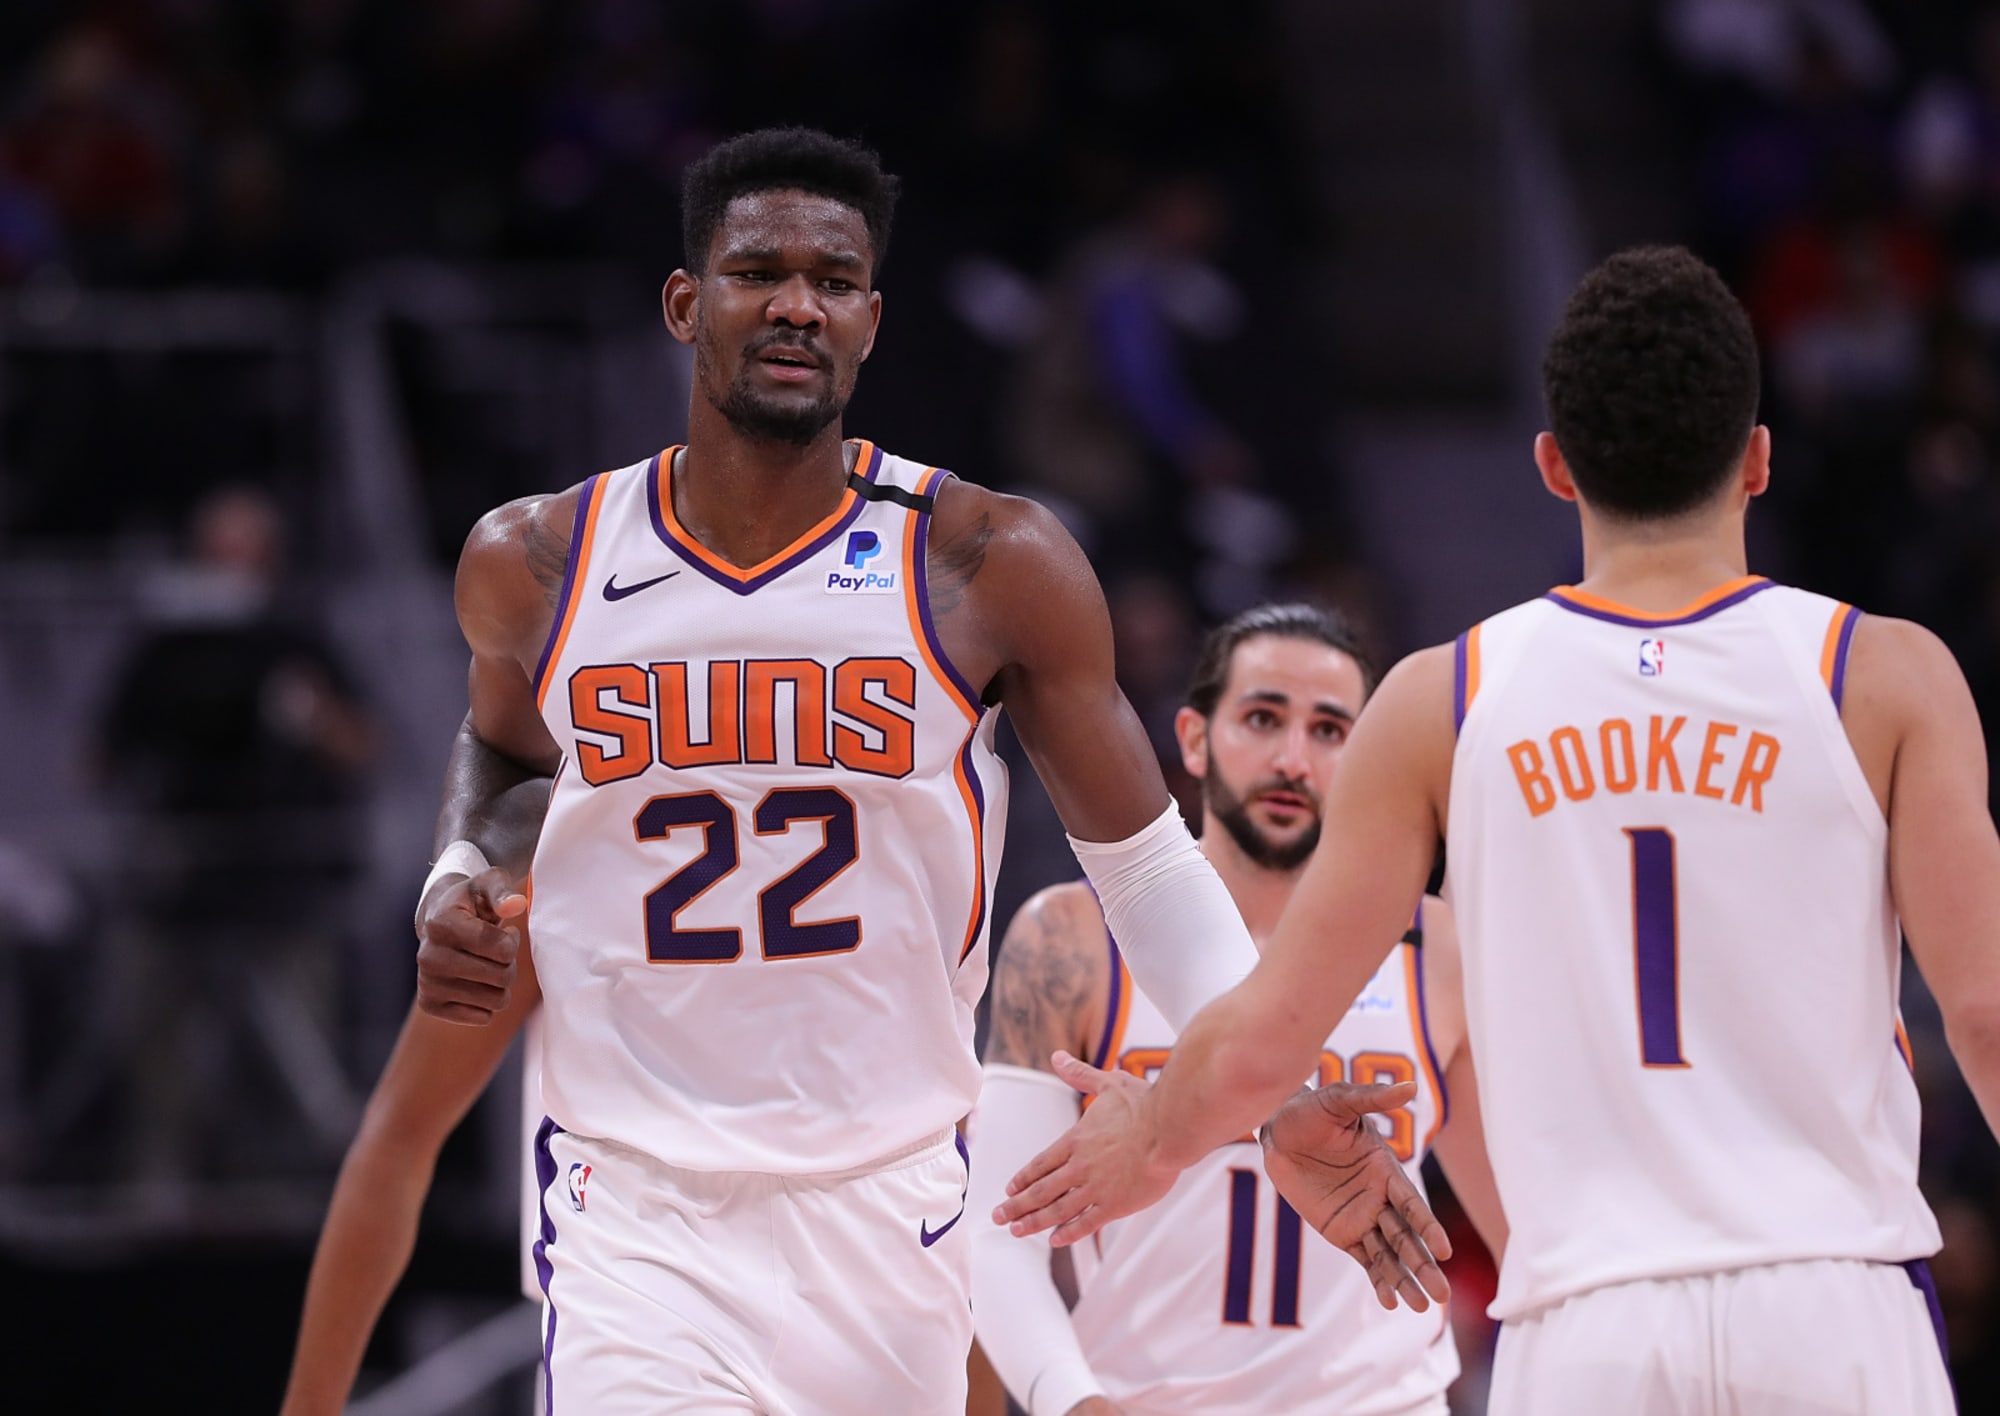 Phoenix Suns players will return in the best shape of their lives